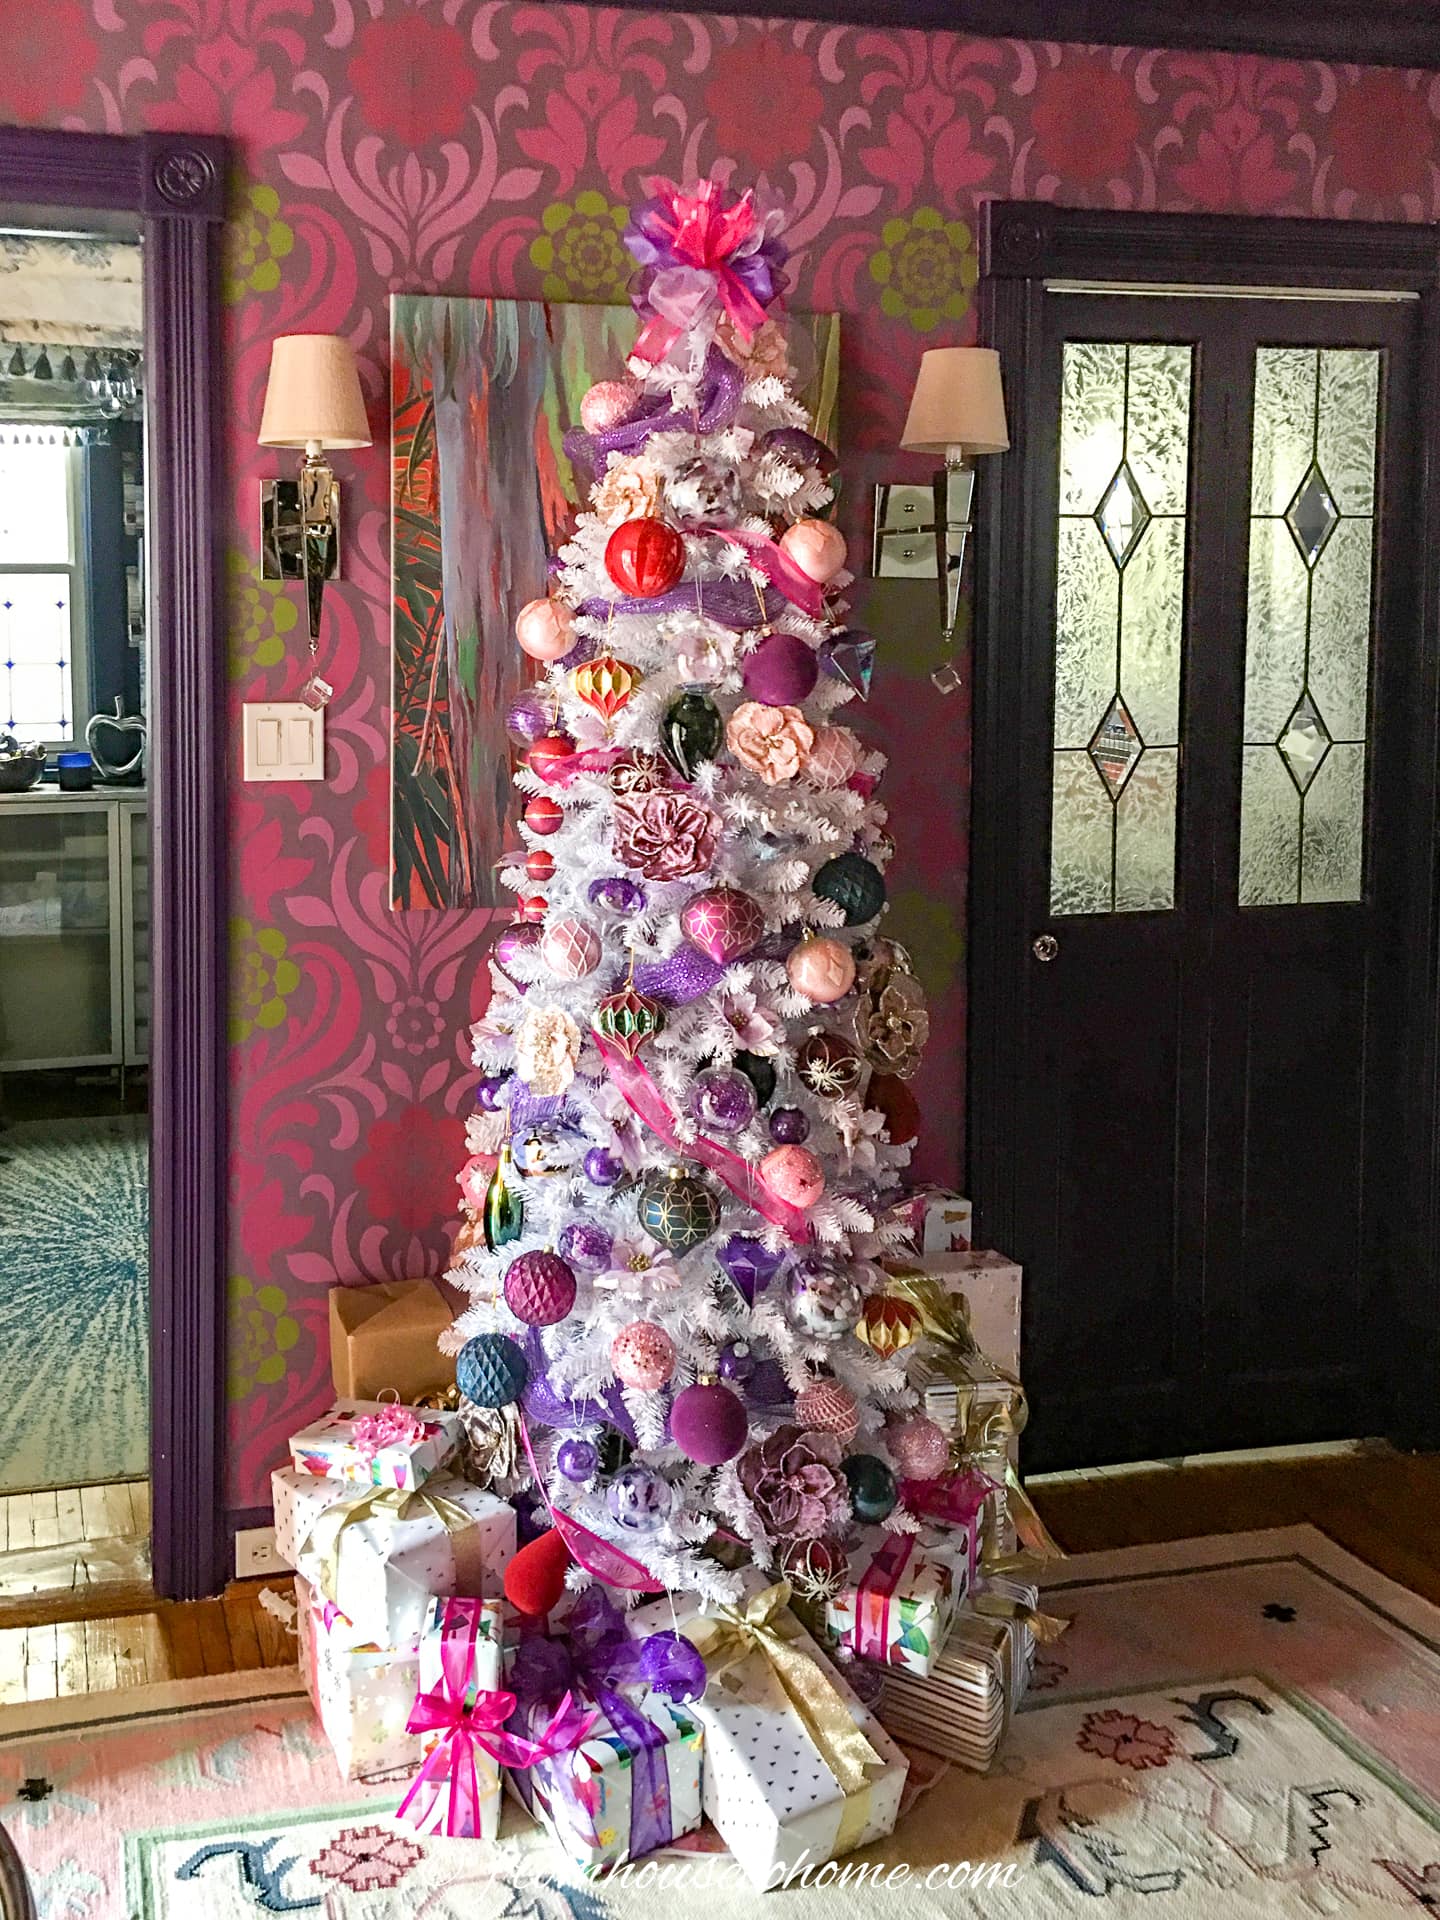 A festive pink and purple Christmas tree with lots of presents at the bottom